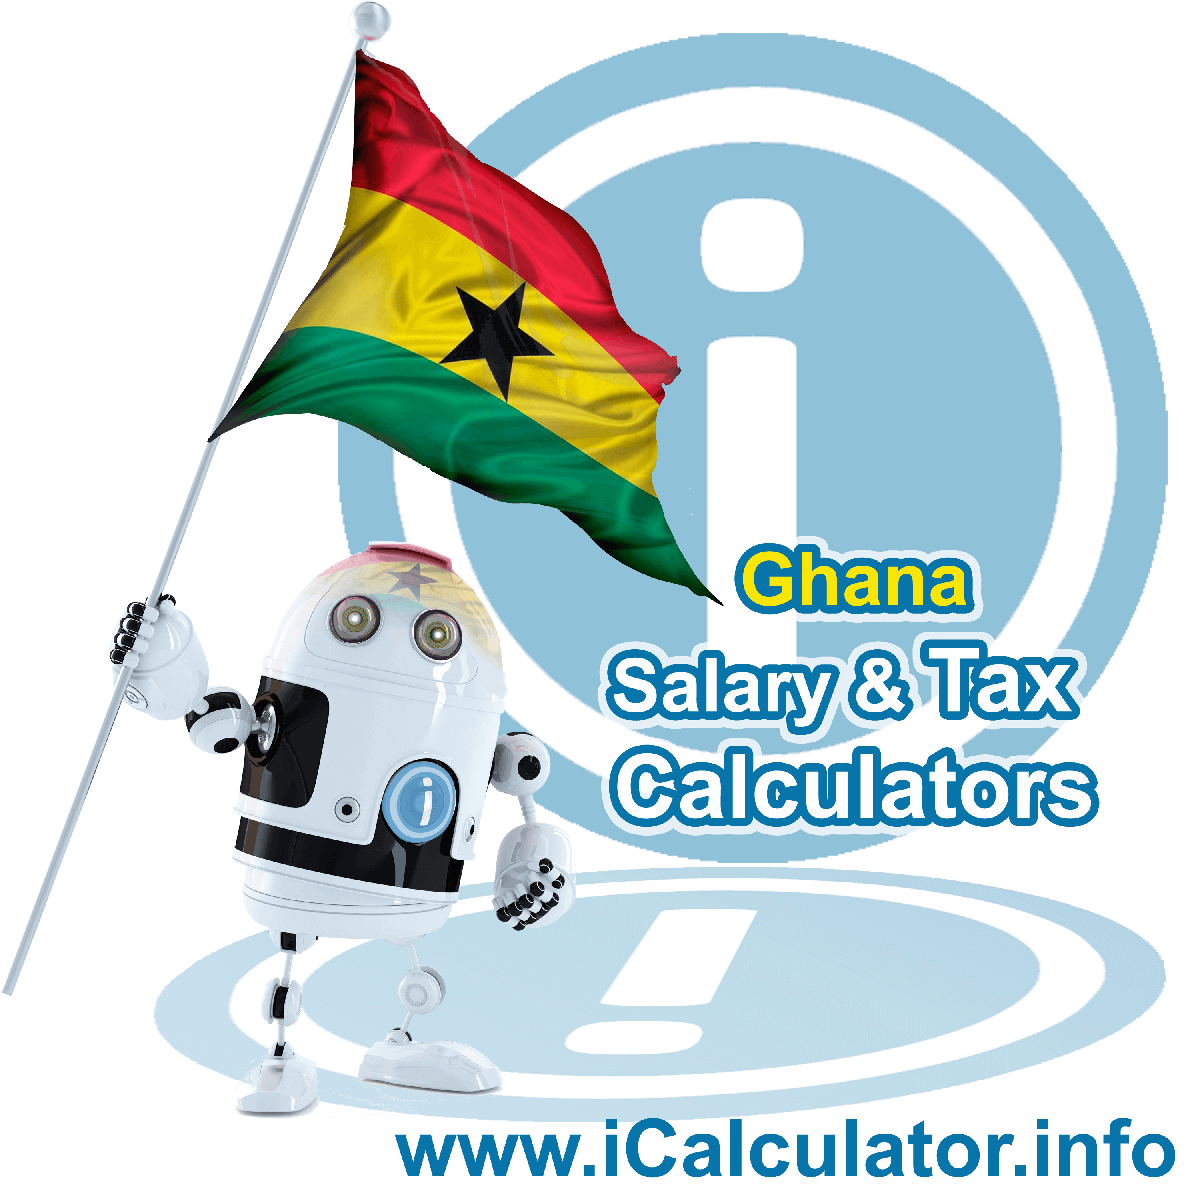 Ghana Salary Calculator. This image shows the Ghanaese flag and information relating to the tax formula for the Ghana Tax Calculator